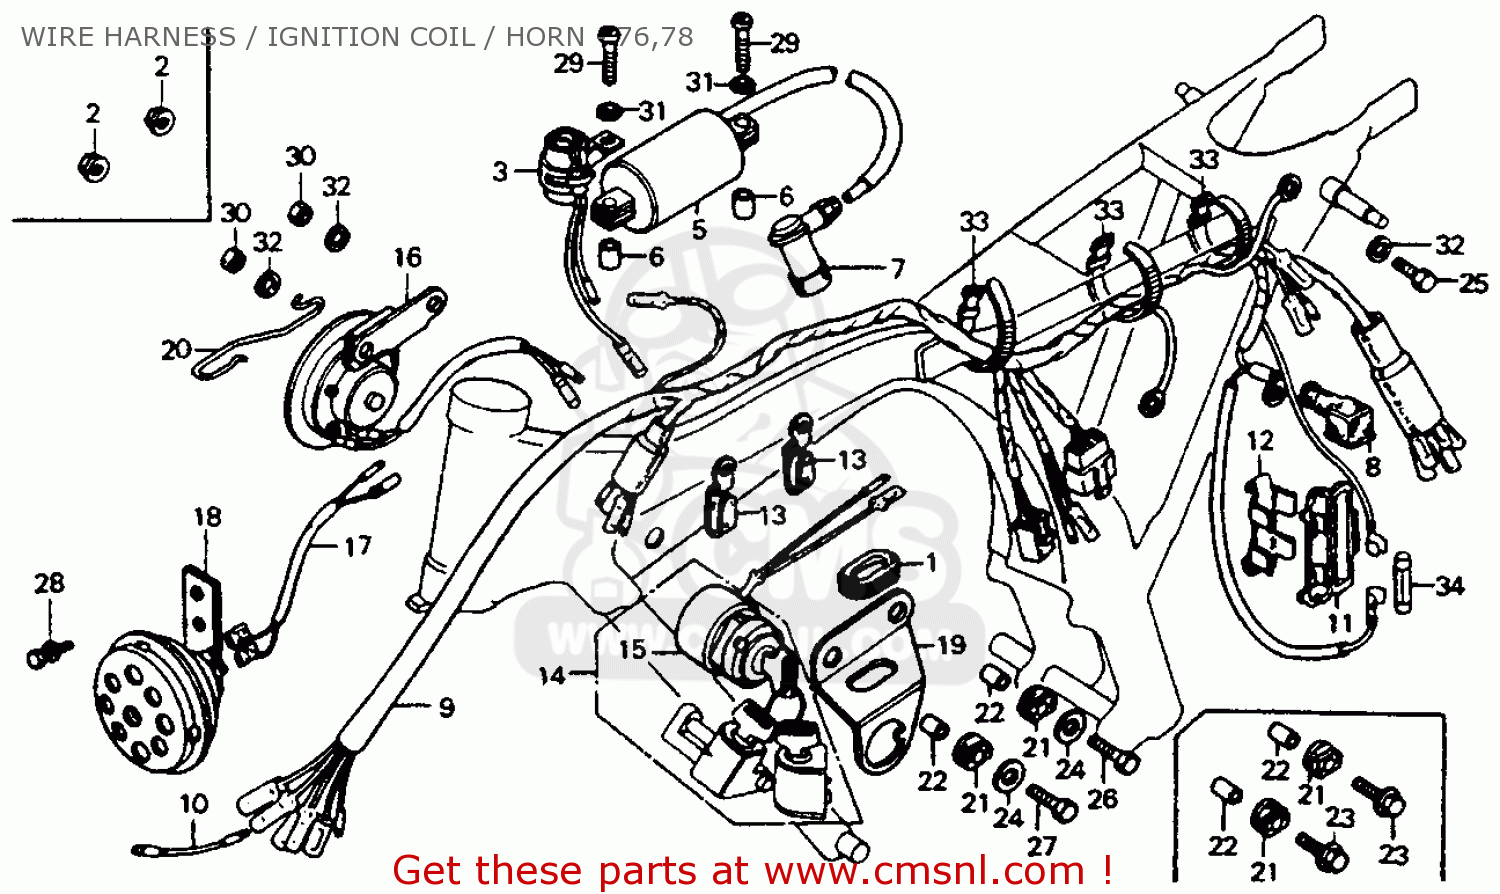 1997 Bmw 540I Thermostat Wiring Diagram from images.cmsnl.com